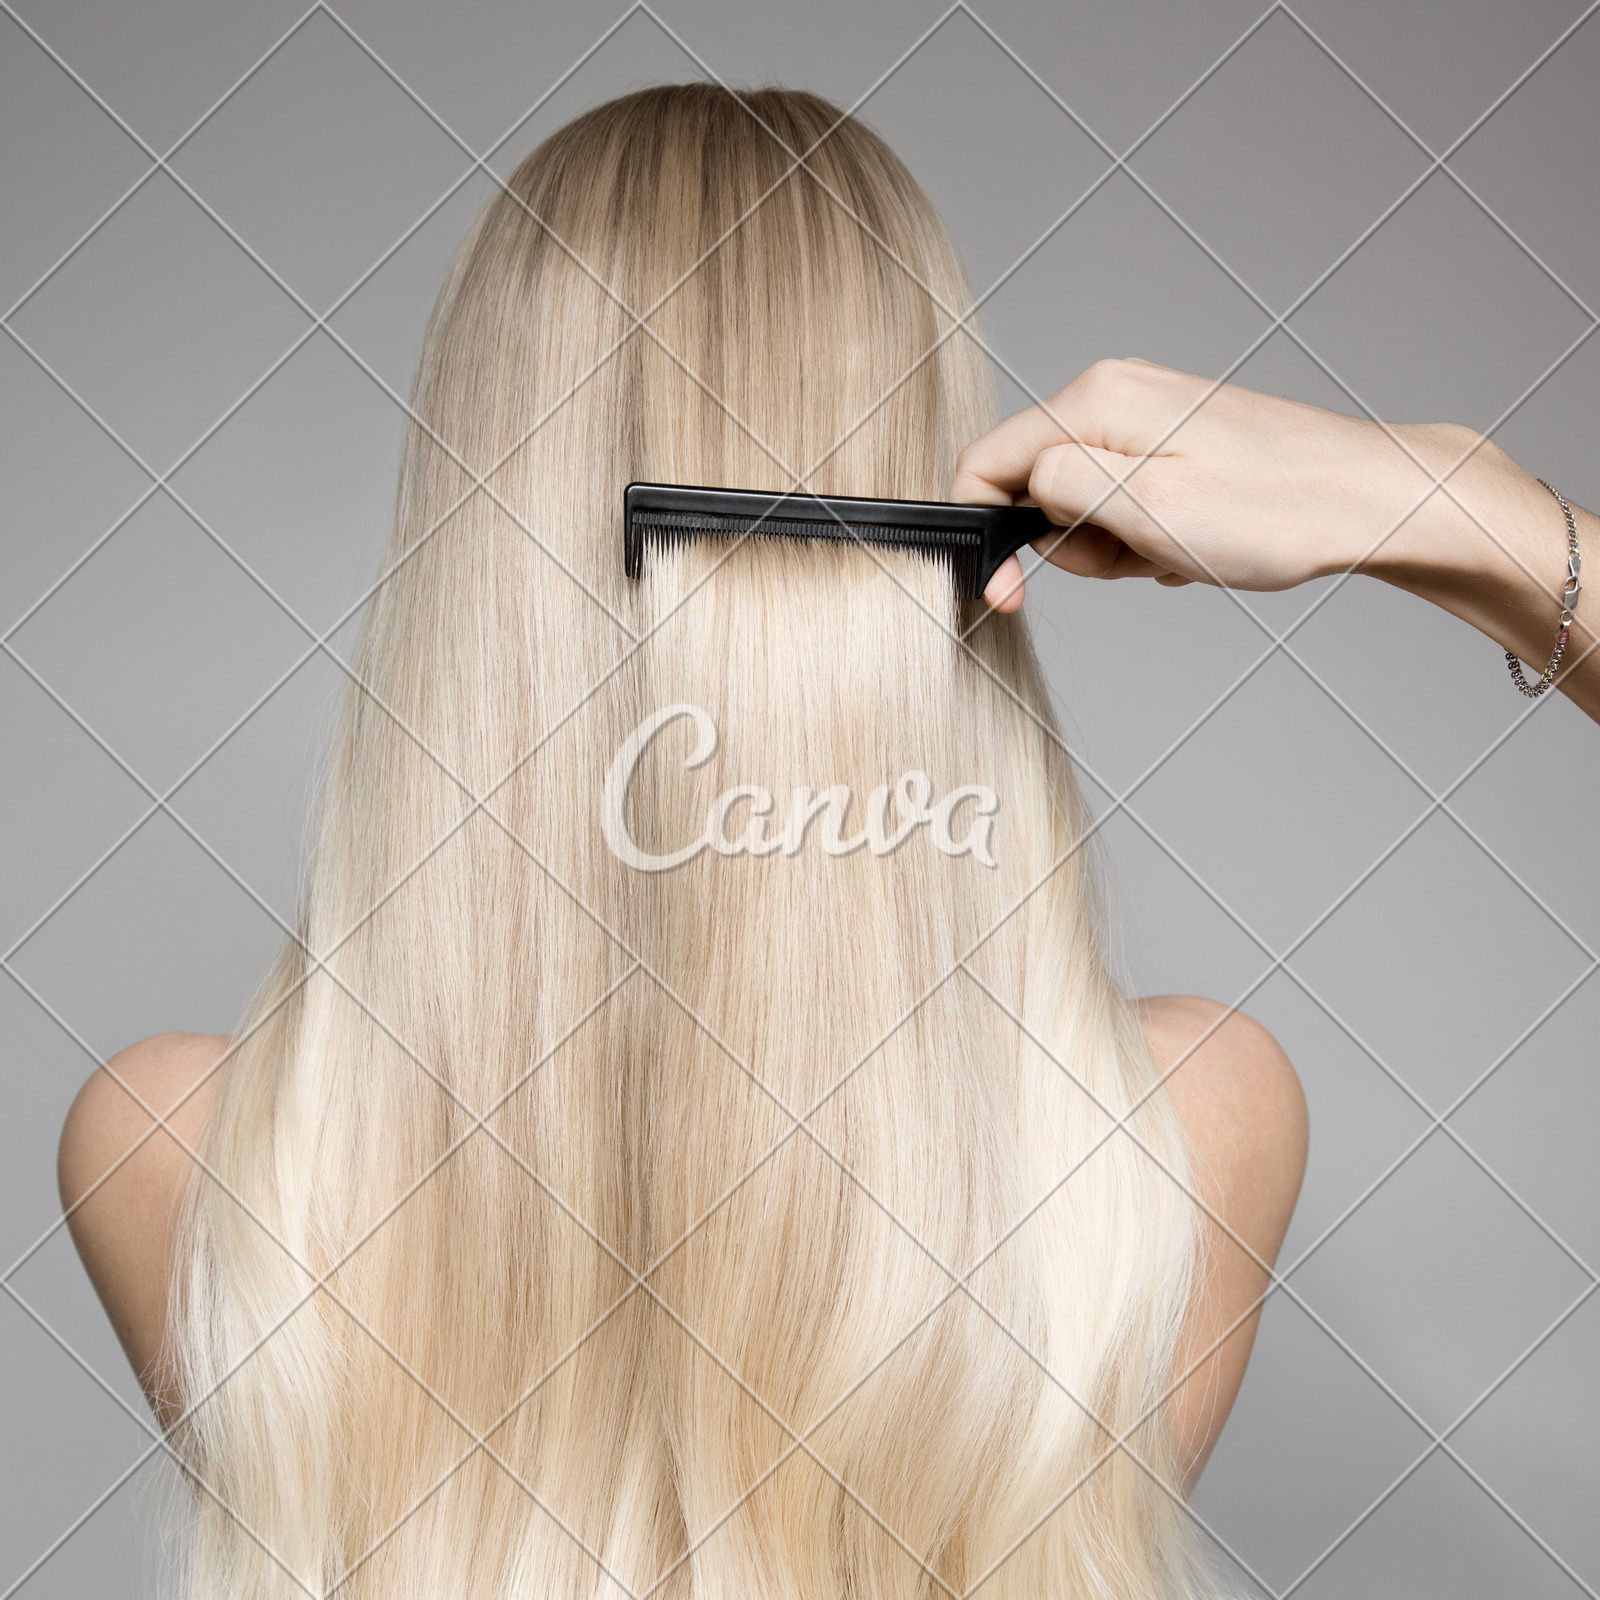 Back View Of Blond Woman Long Hair Hand With Hairbrush